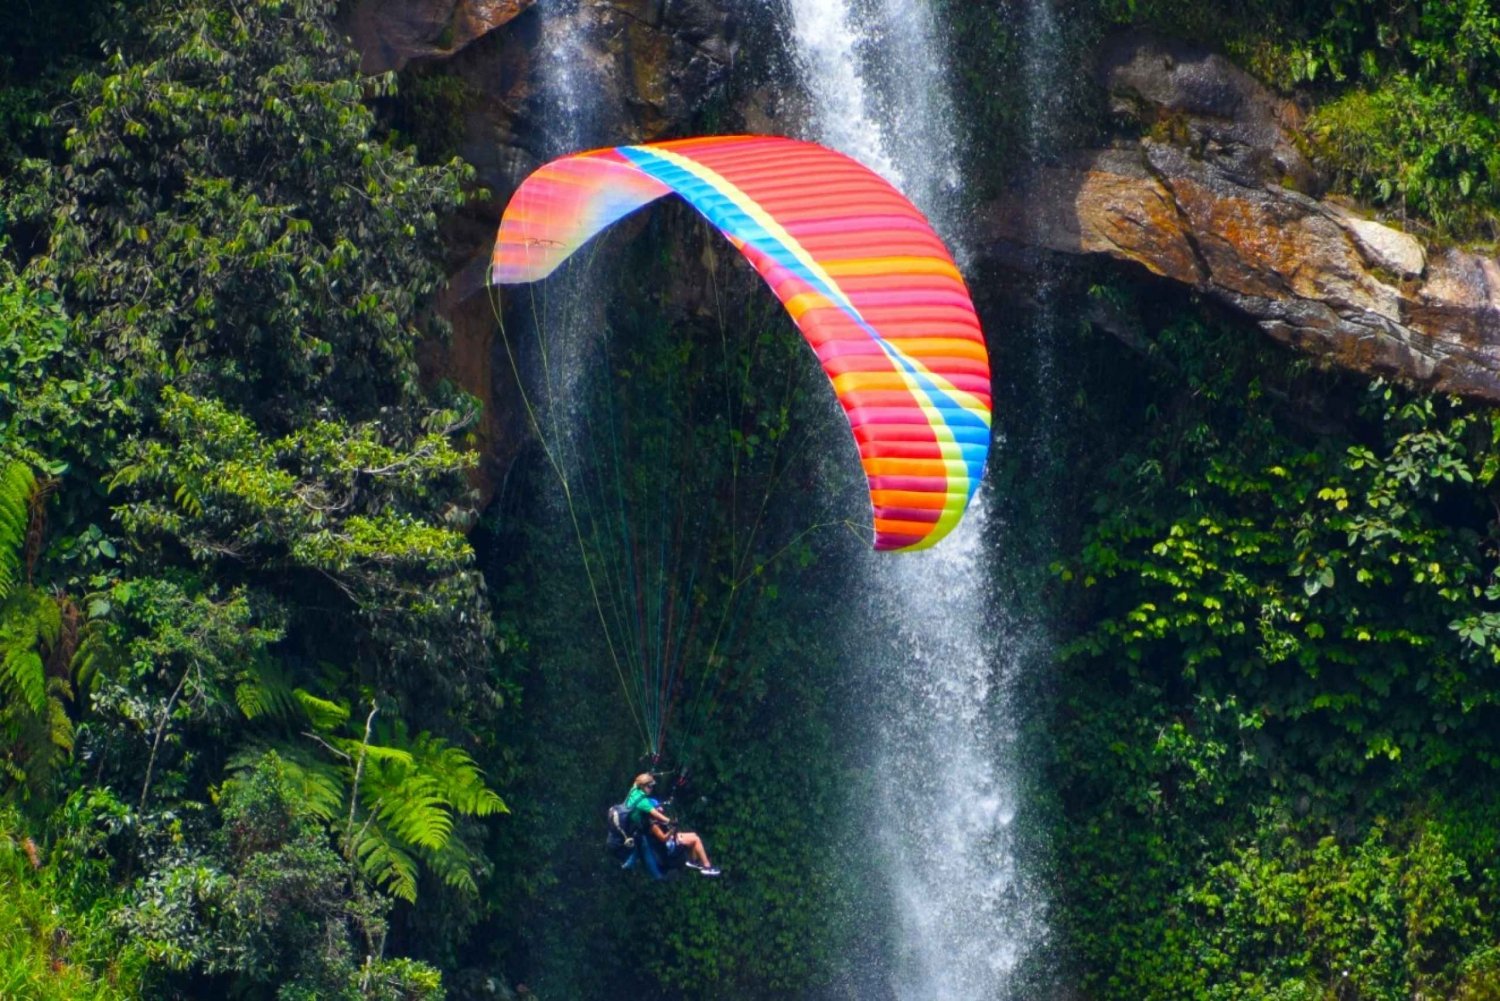 From Medellín: Paragliding and Rafting Combo Tour